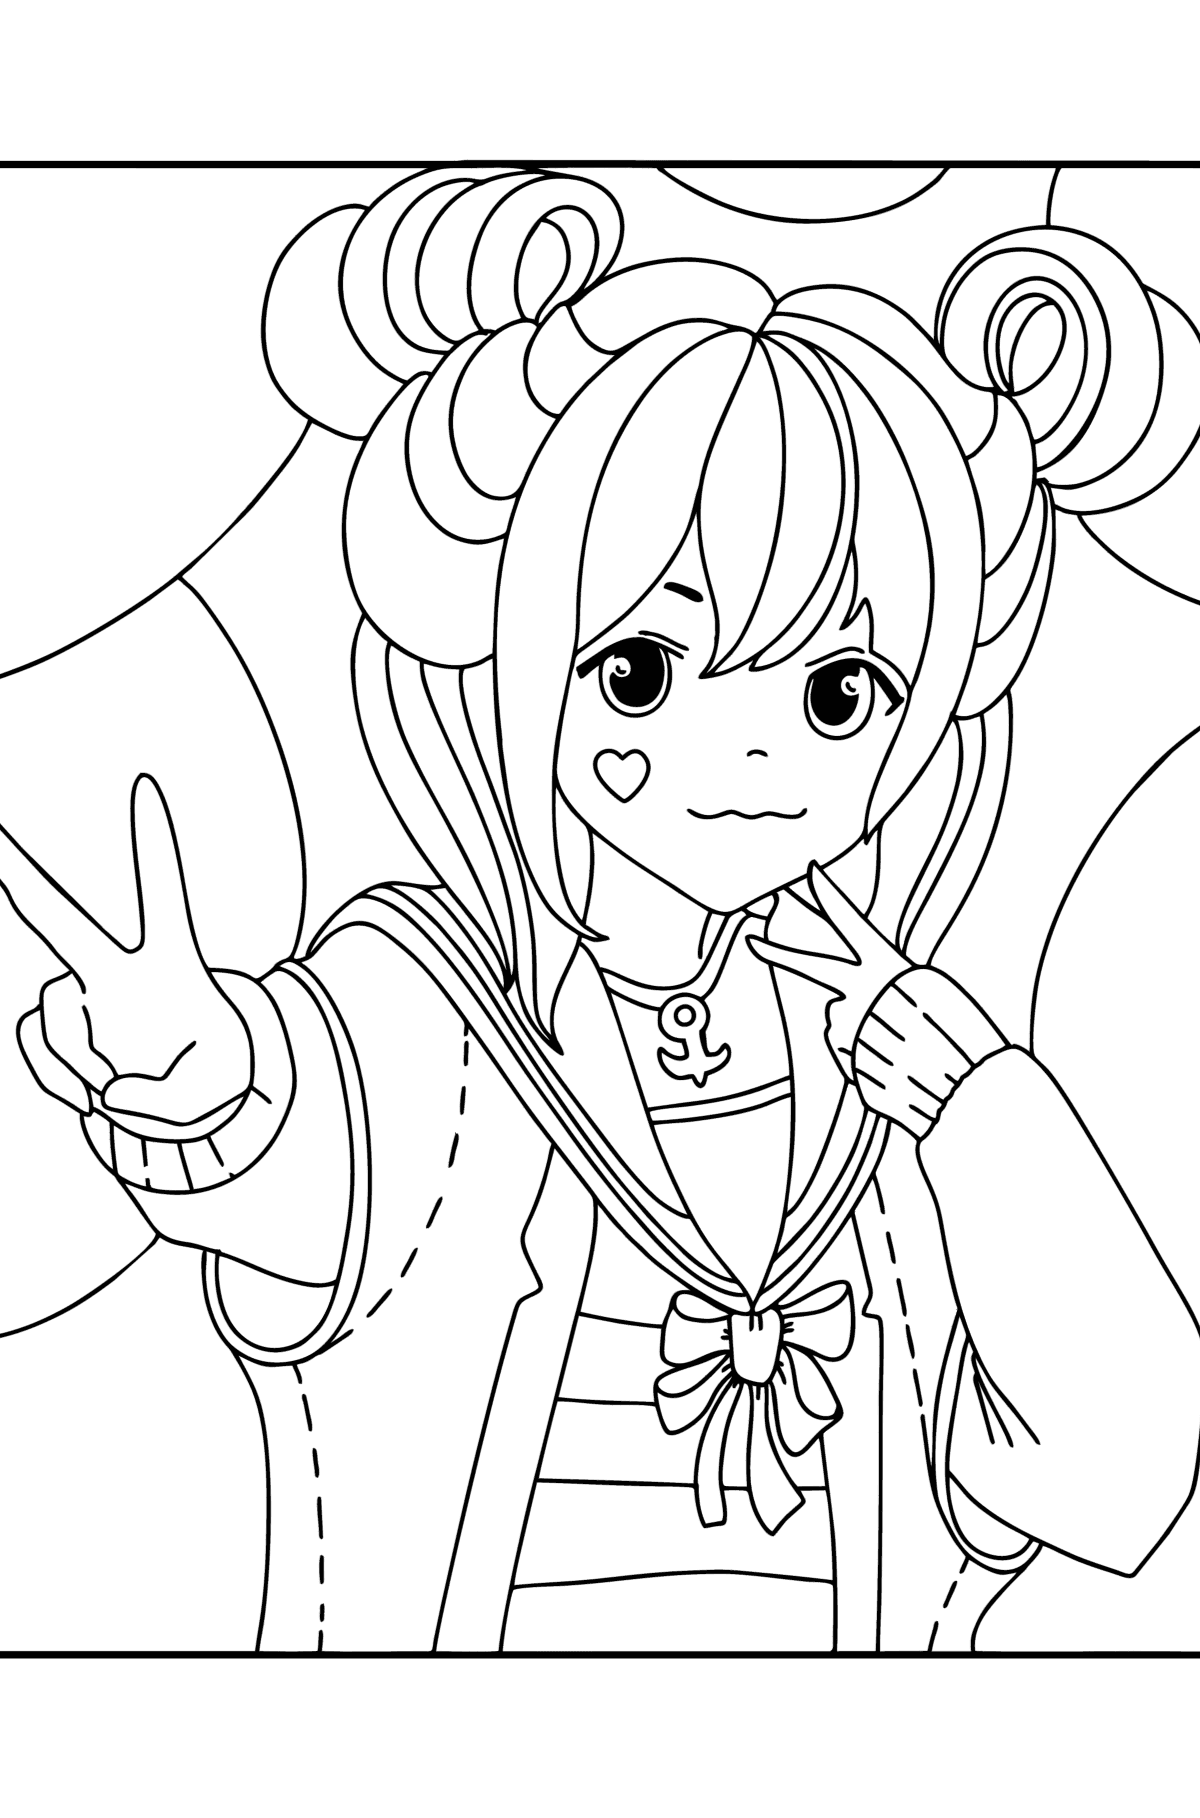  440 Collections Coloring Pages For Anime Best